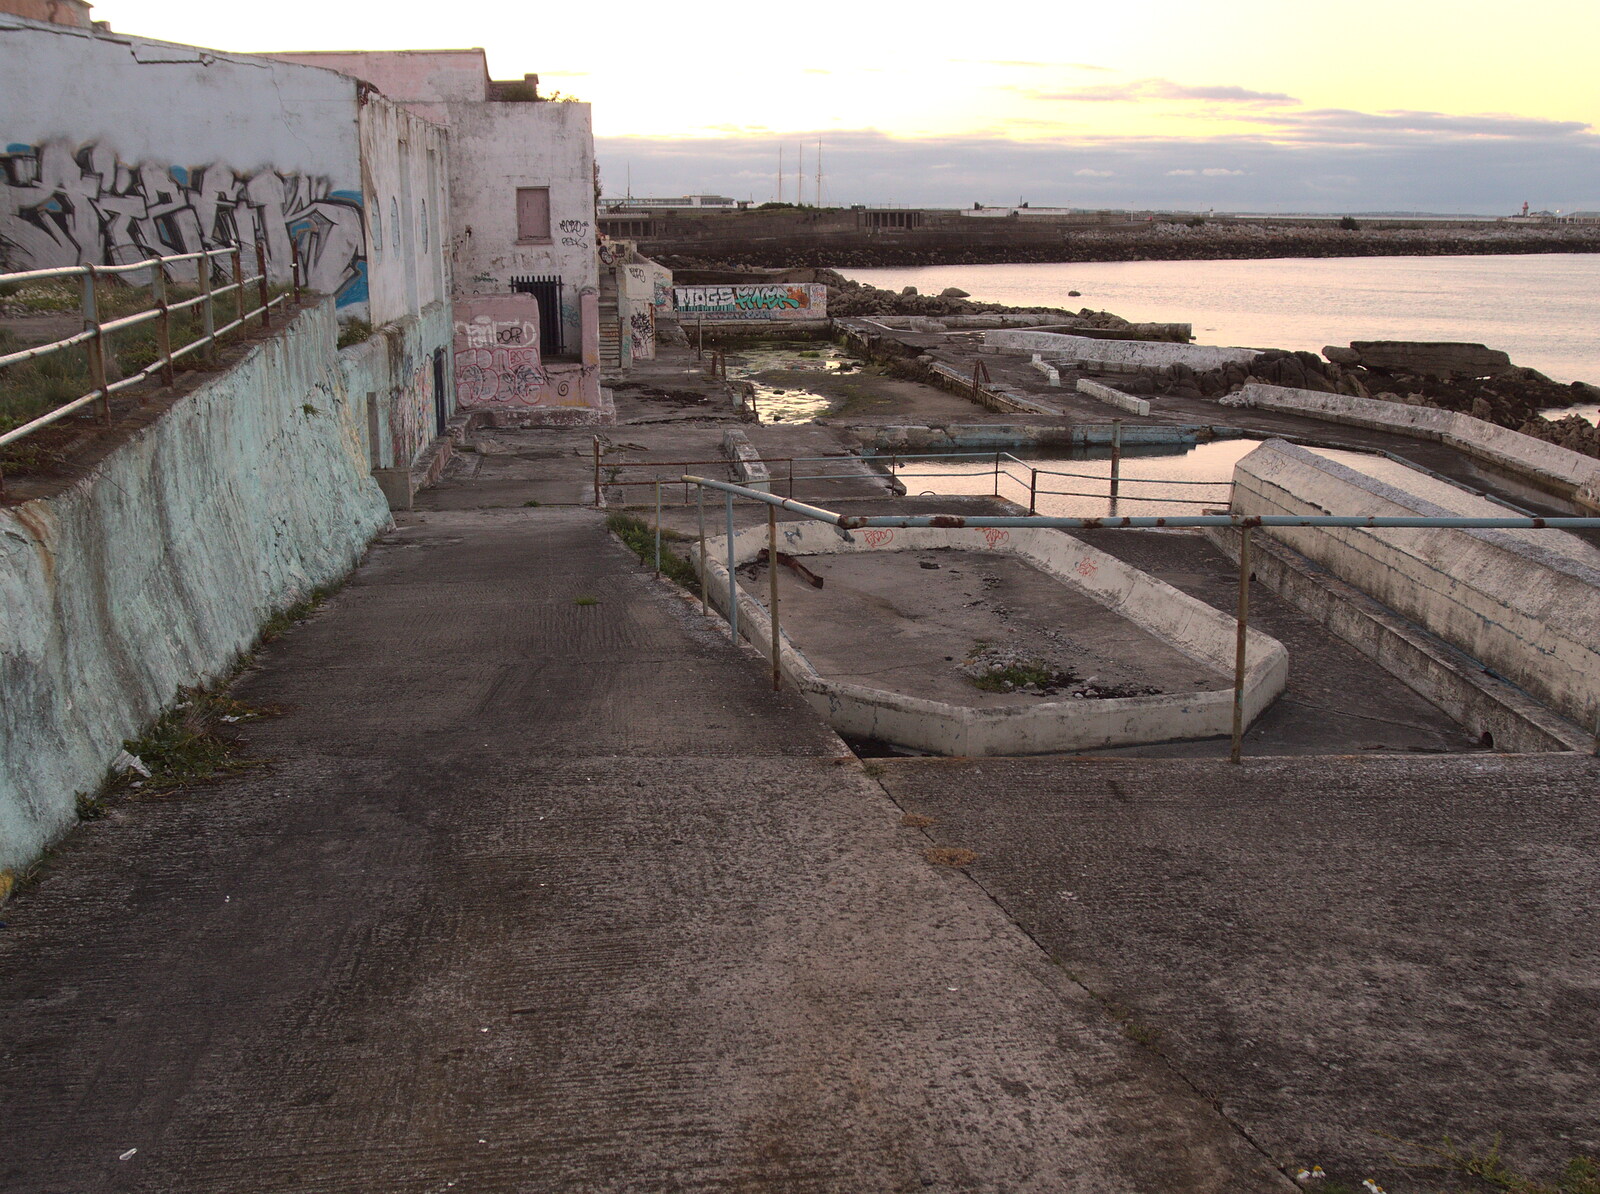 The derelict swimming pools of Dun Laoghaire from Fire and Water: The Burning of the Blackrock Centre, County Dublin, Ireland - 12th August 2017